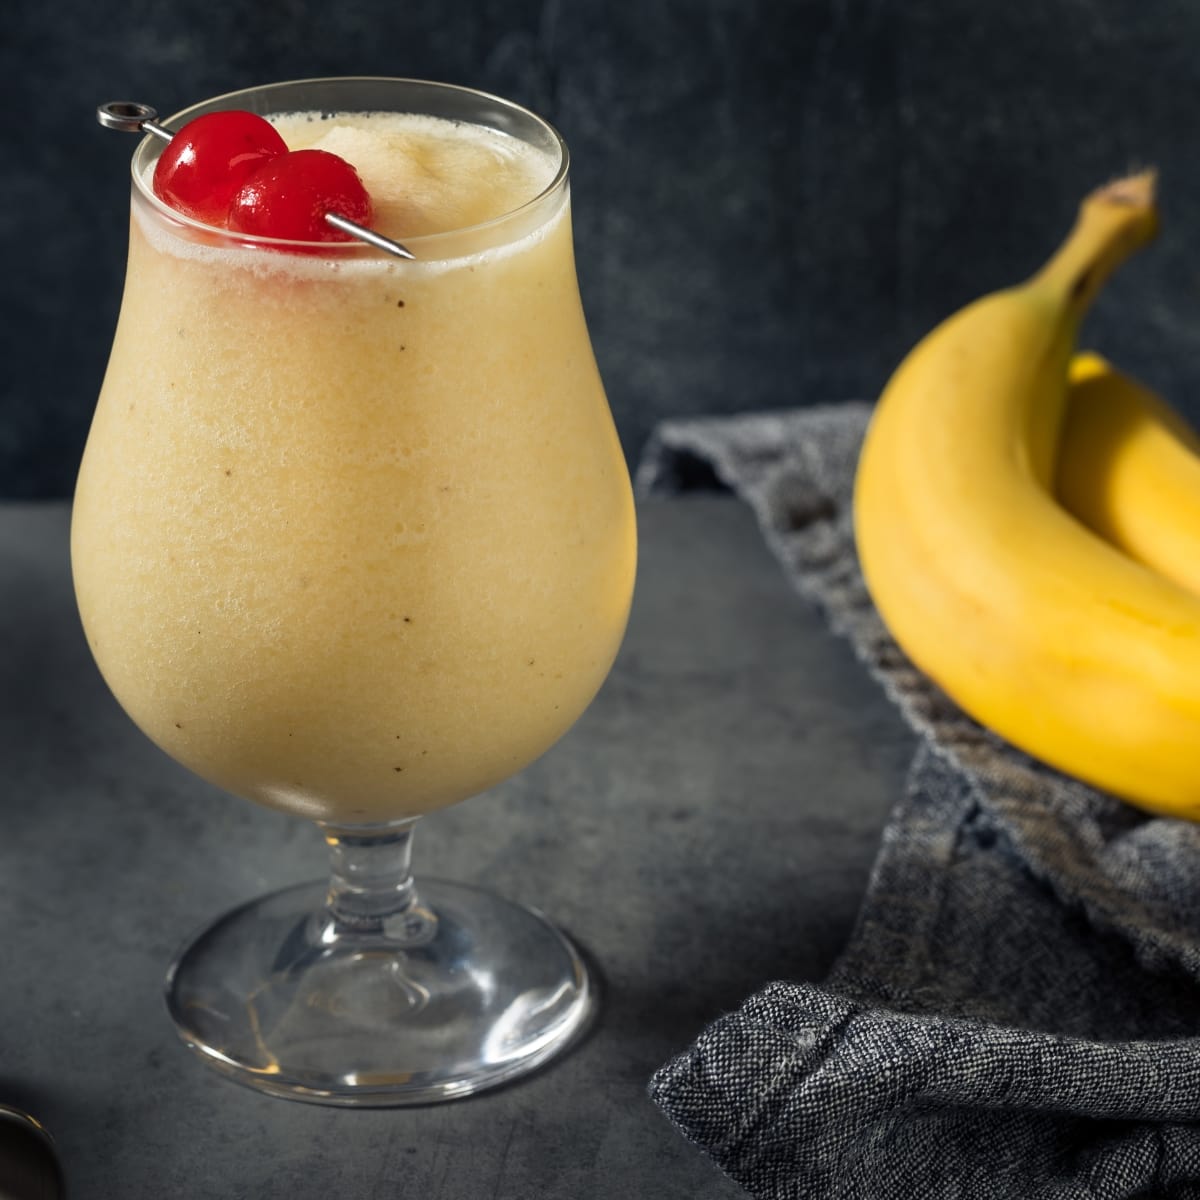 A Glass of Banana Daiquiri Cocktail with Two Ripe Bananas in Side